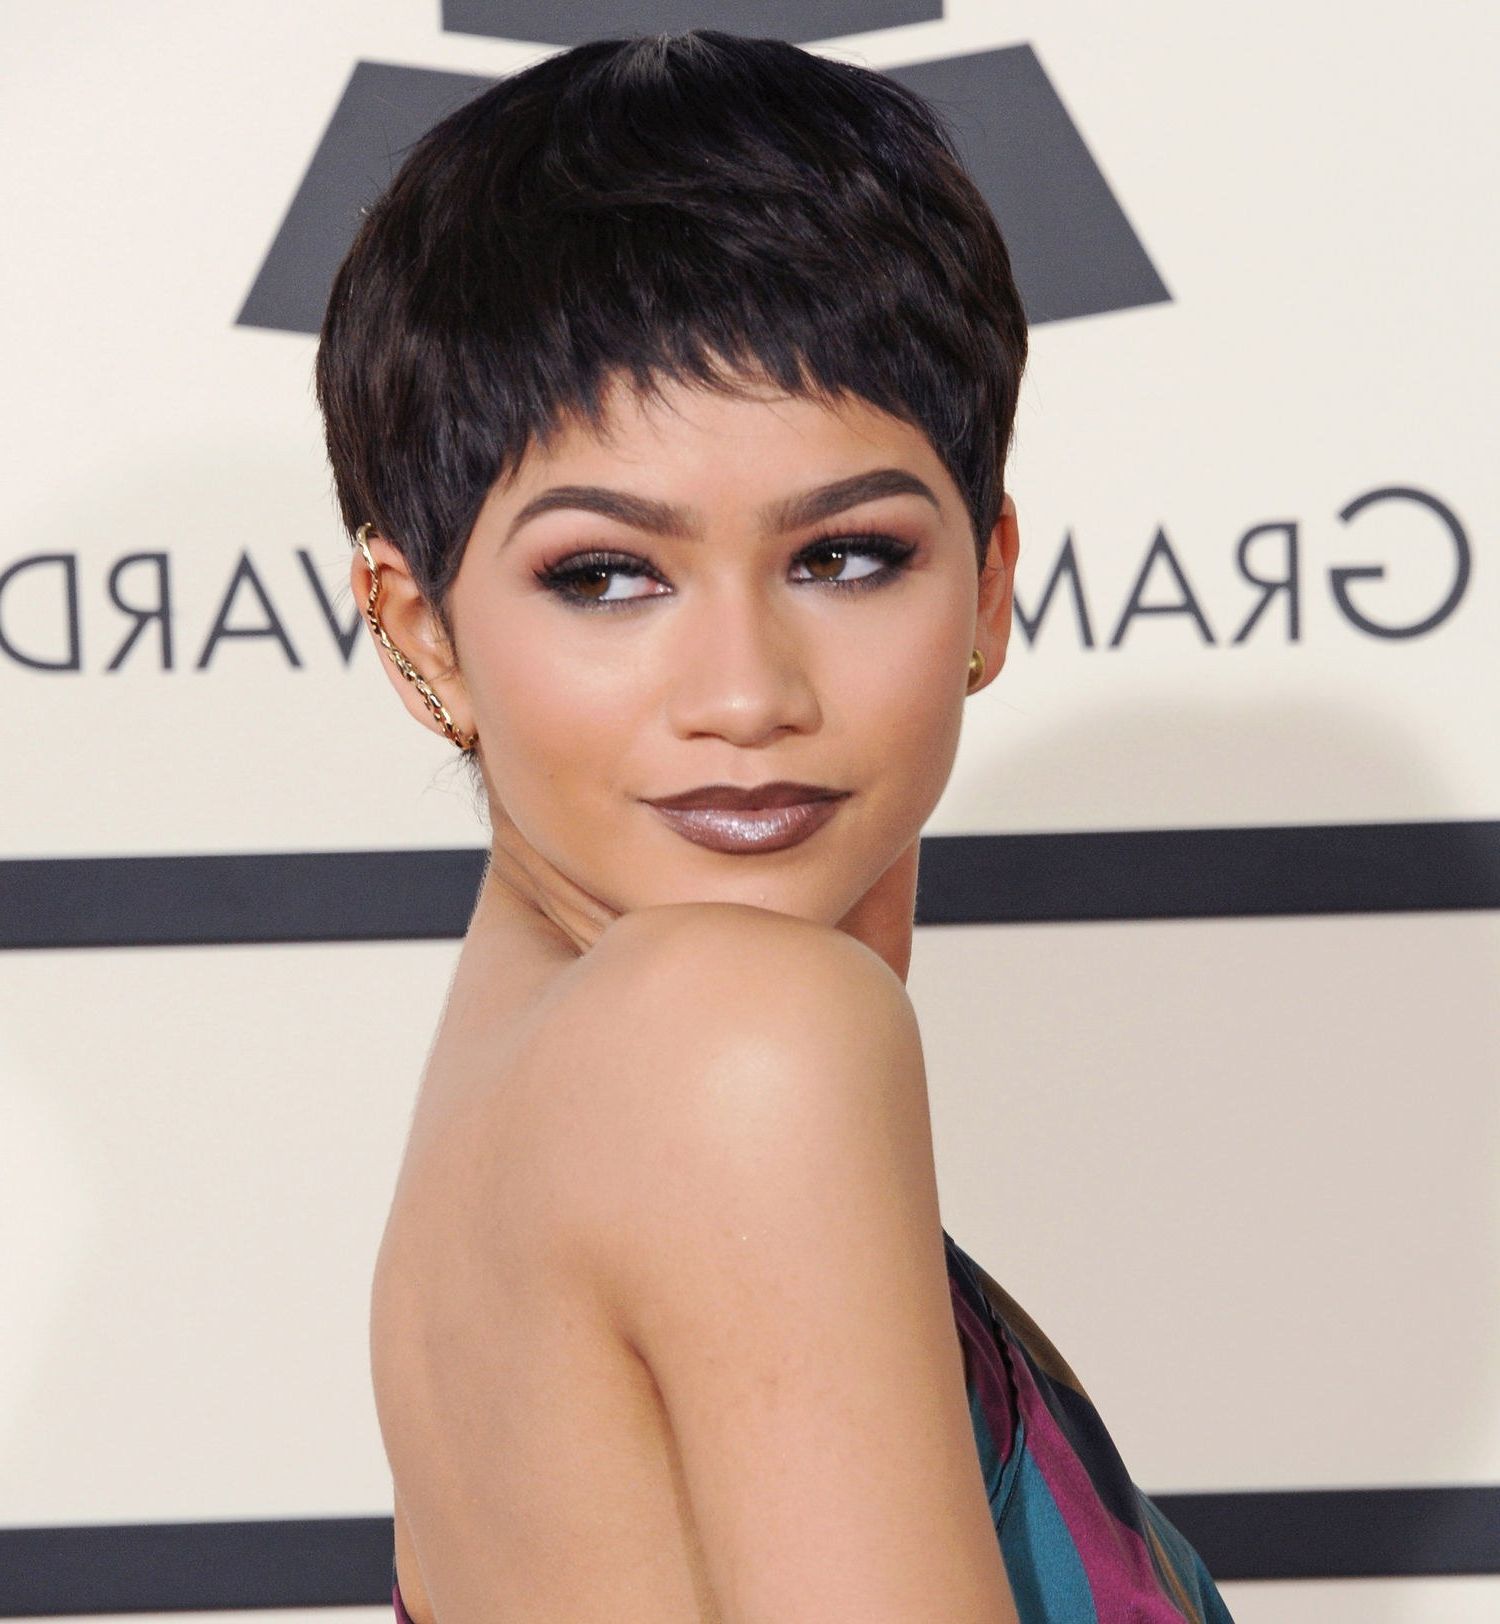 Pixie Cuts News, Tips & Guides | Glamour Intended For Glamorous Pixie Hairstyles (View 18 of 20)